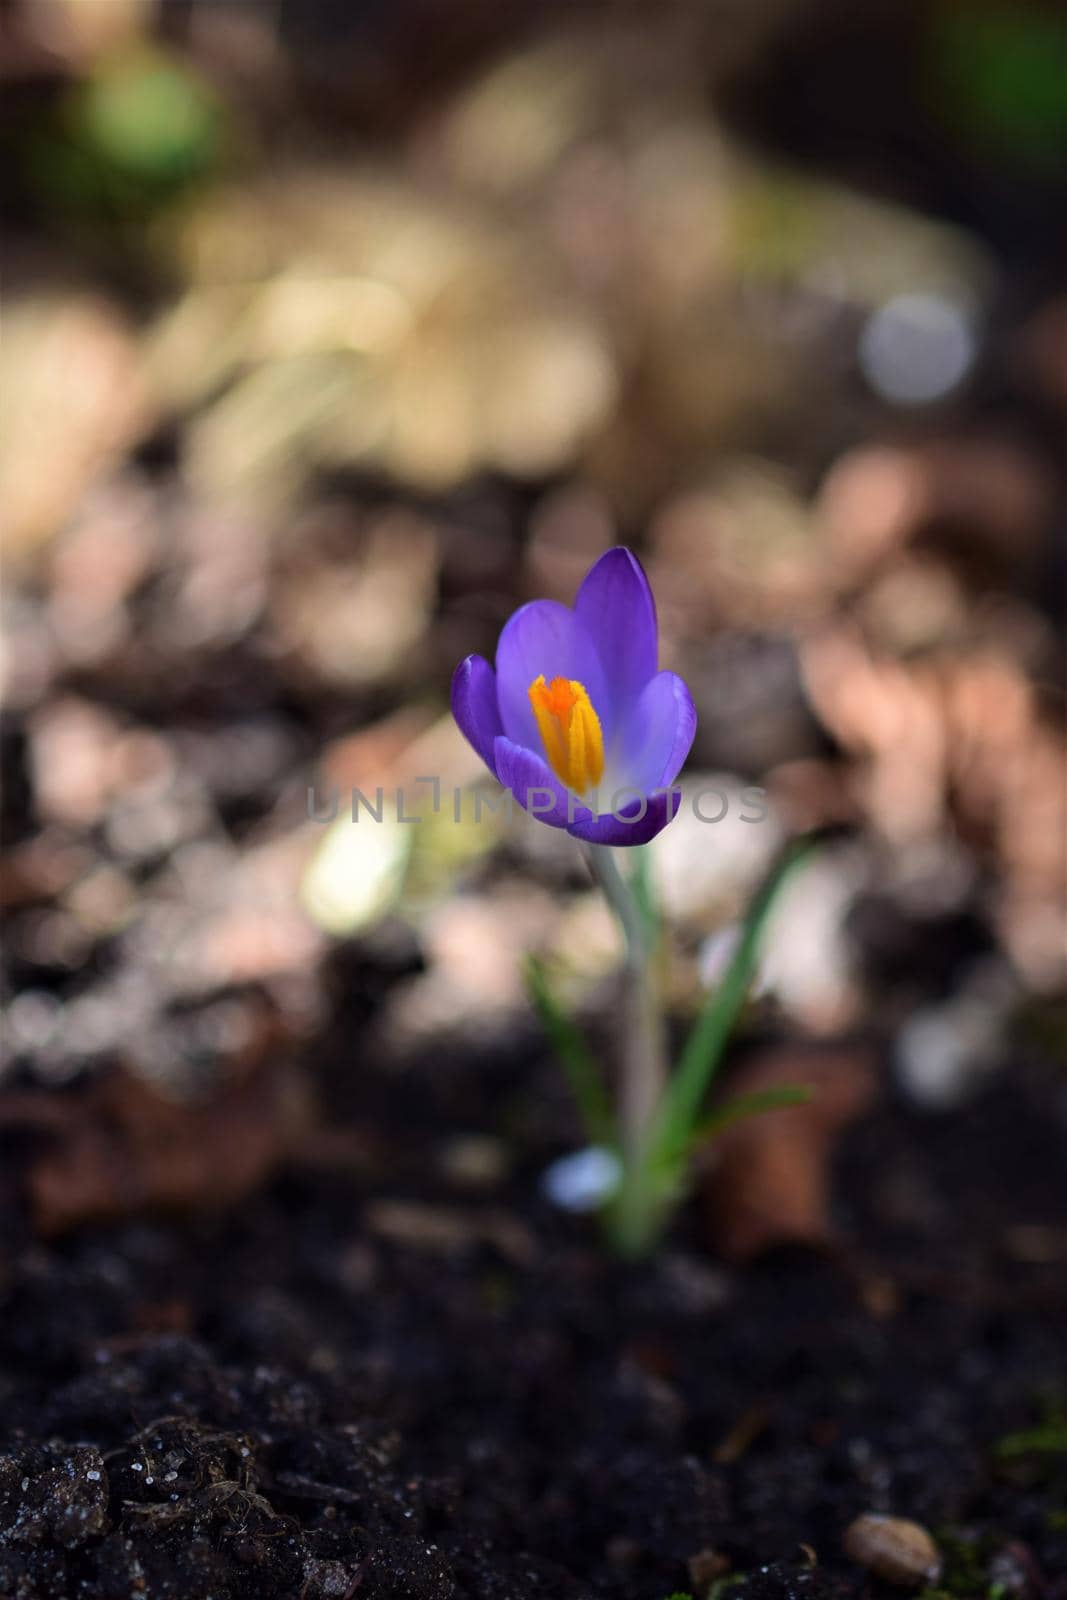 Purple crocus as a close up against a blurred background by Luise123